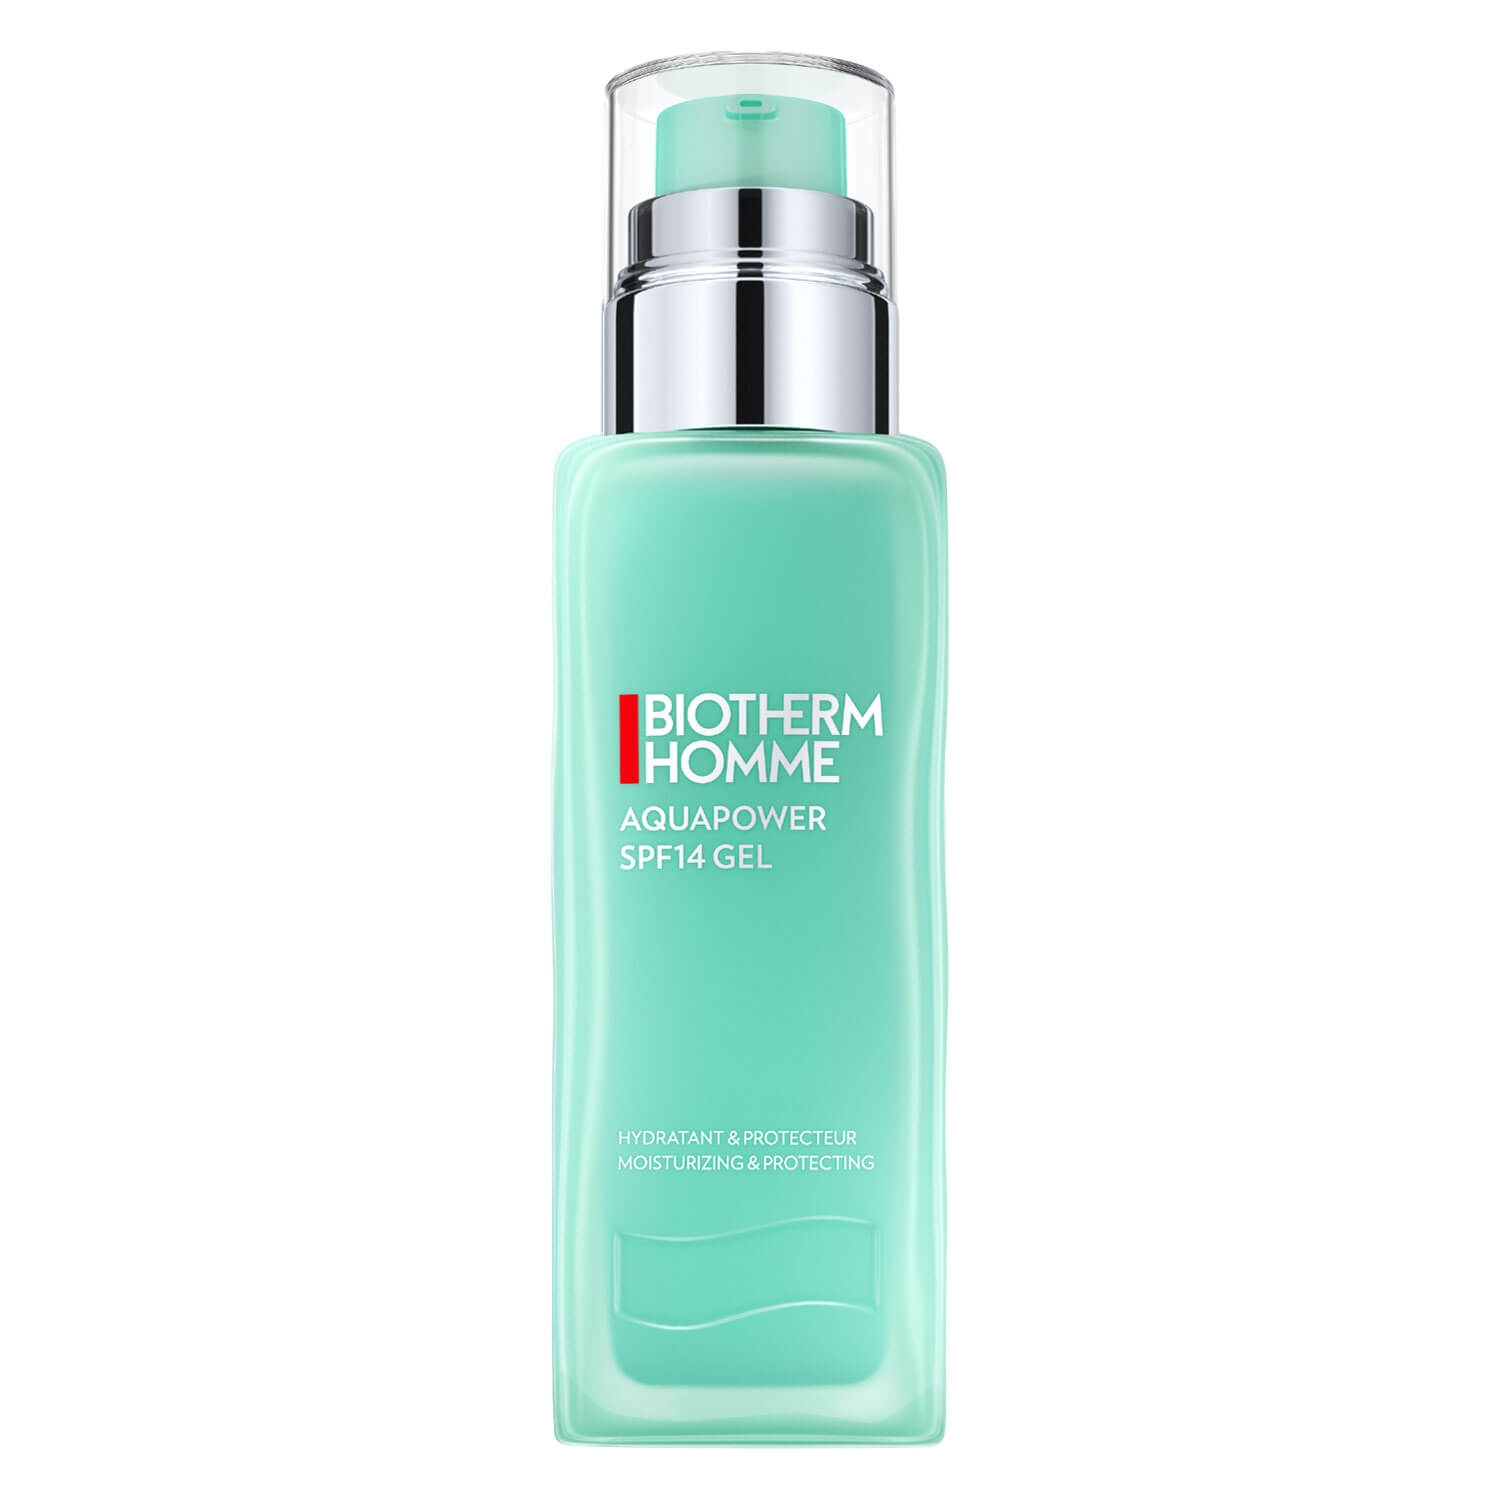 Product image from Biotherm Homme - Aquapower SPF14 Gel